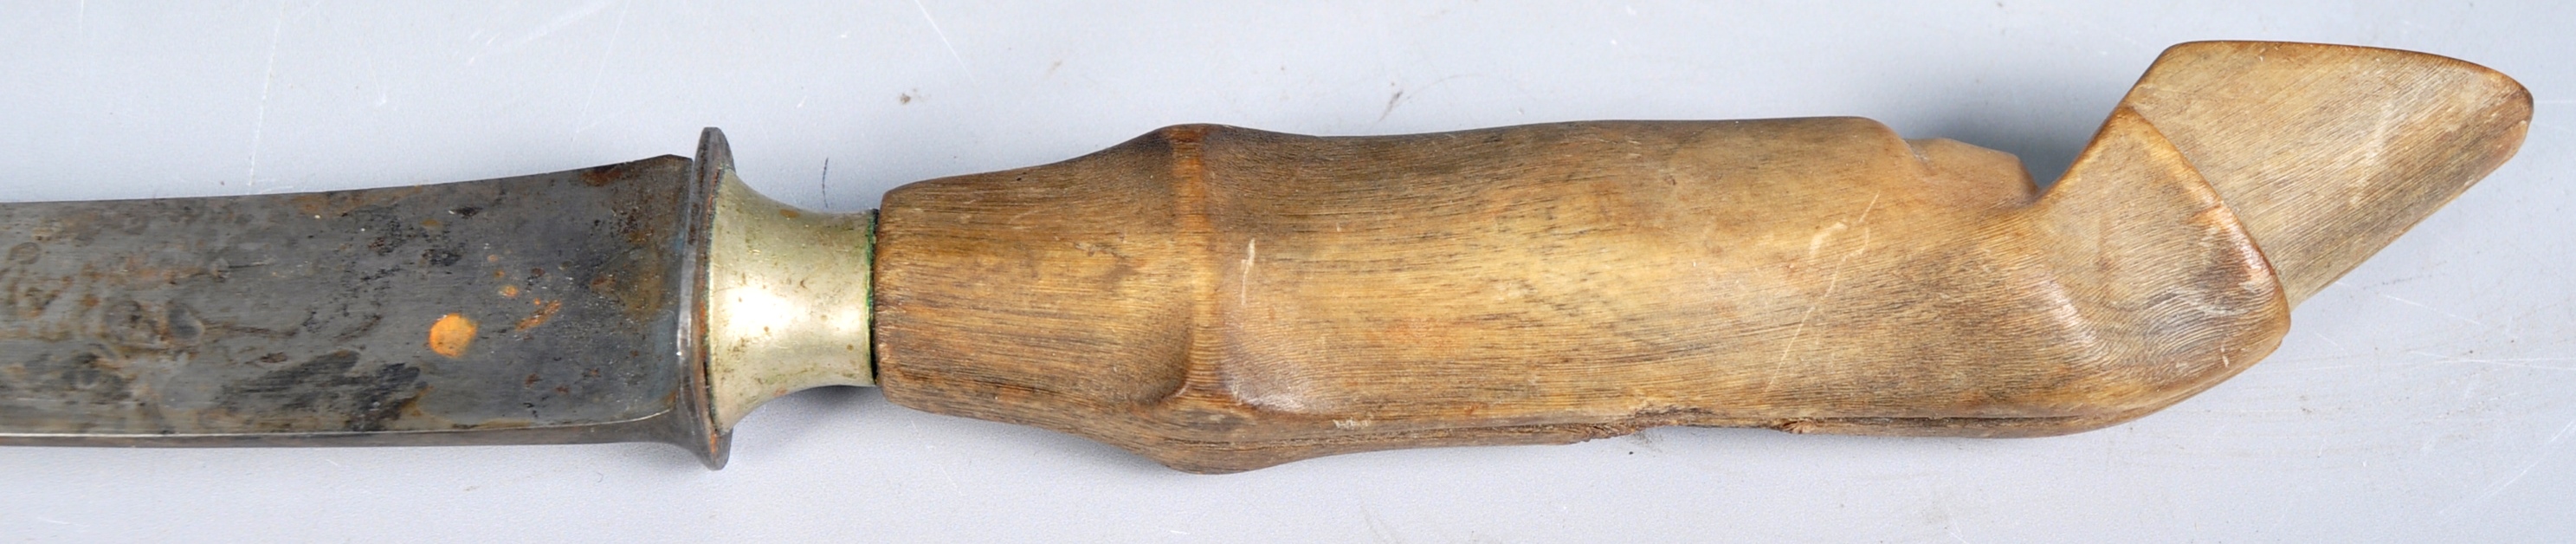 COLLECTION OF RHINO & BOVINE HORN ARTIFACTS - Image 8 of 8